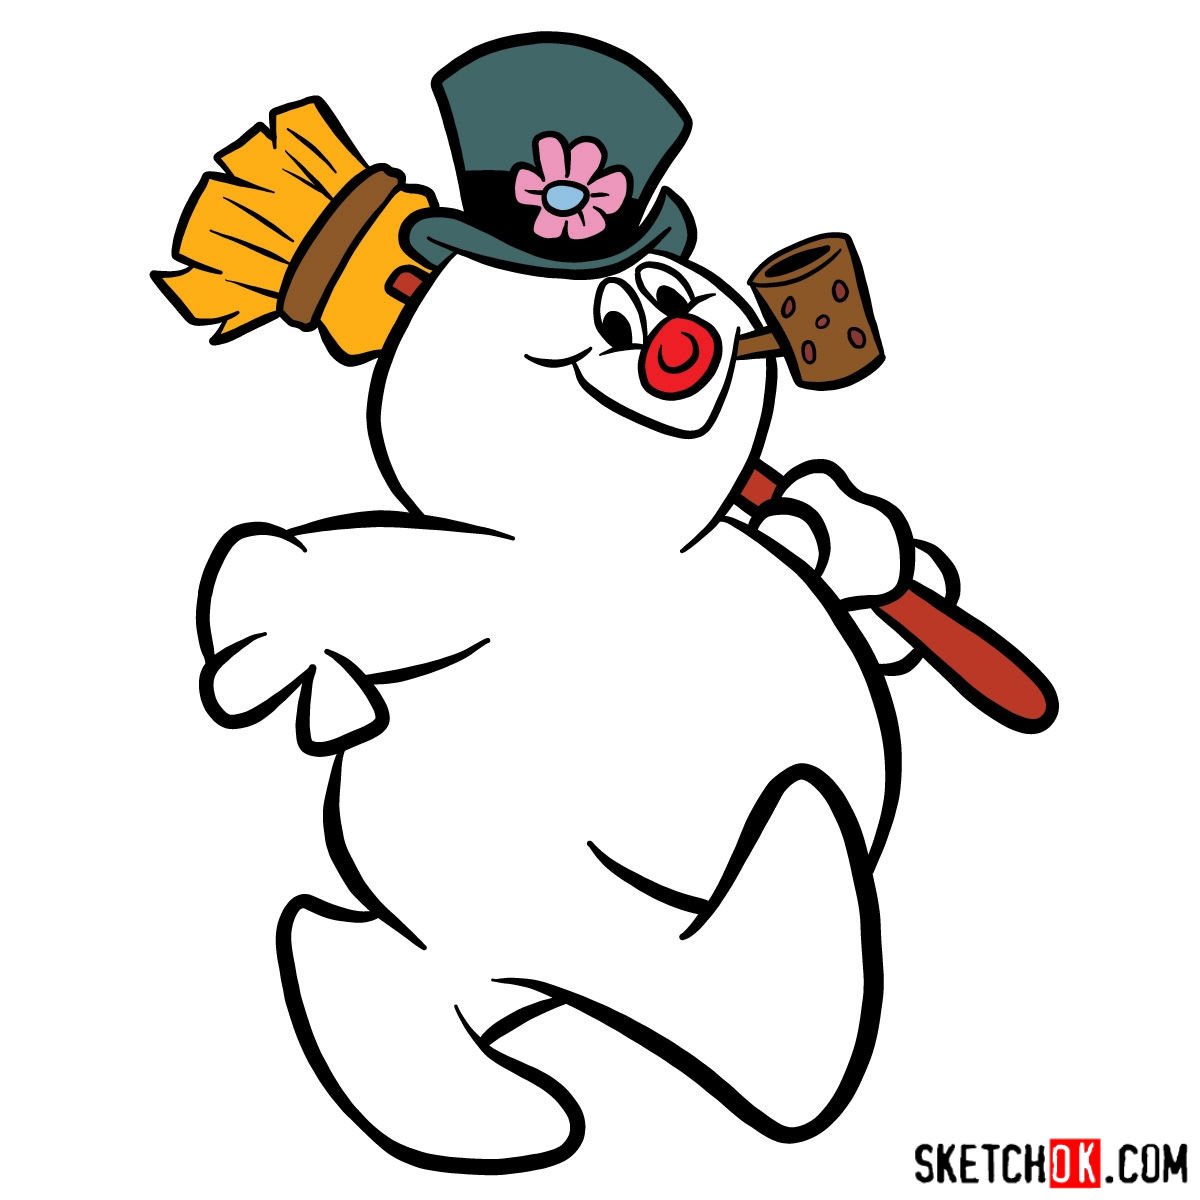 Frosty the Snowman Archives - Sketchok easy drawing guides